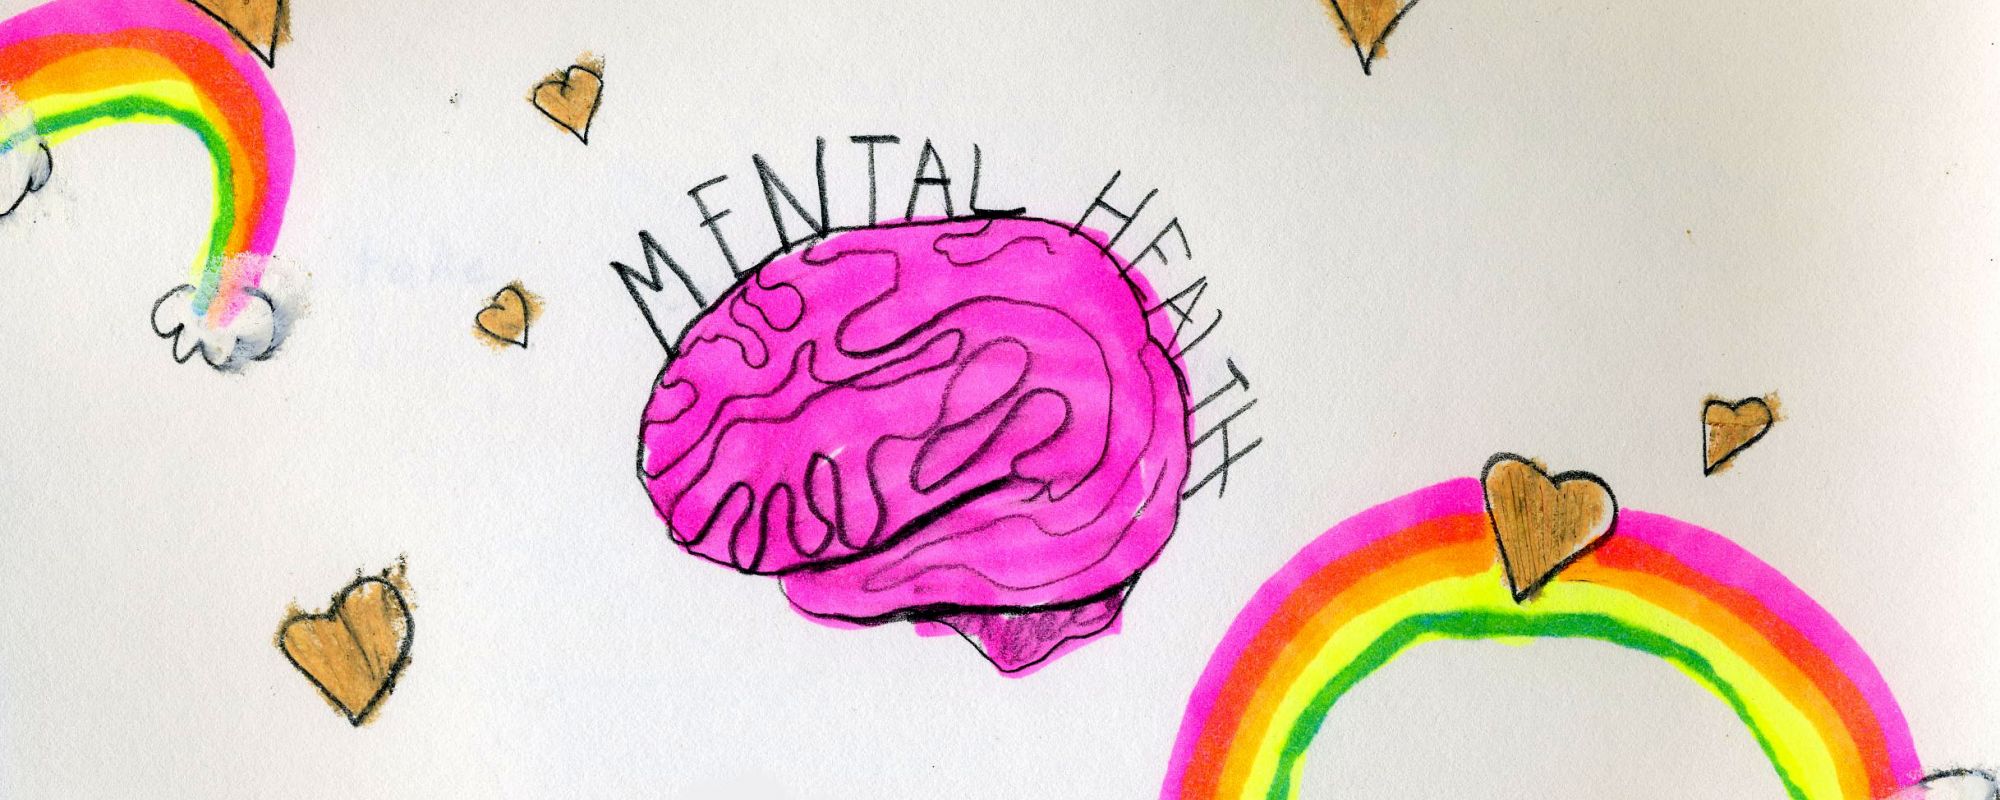 A hand-drawn photo of a brain that says "mental health" on top, with rainbows and hearts around the paper.